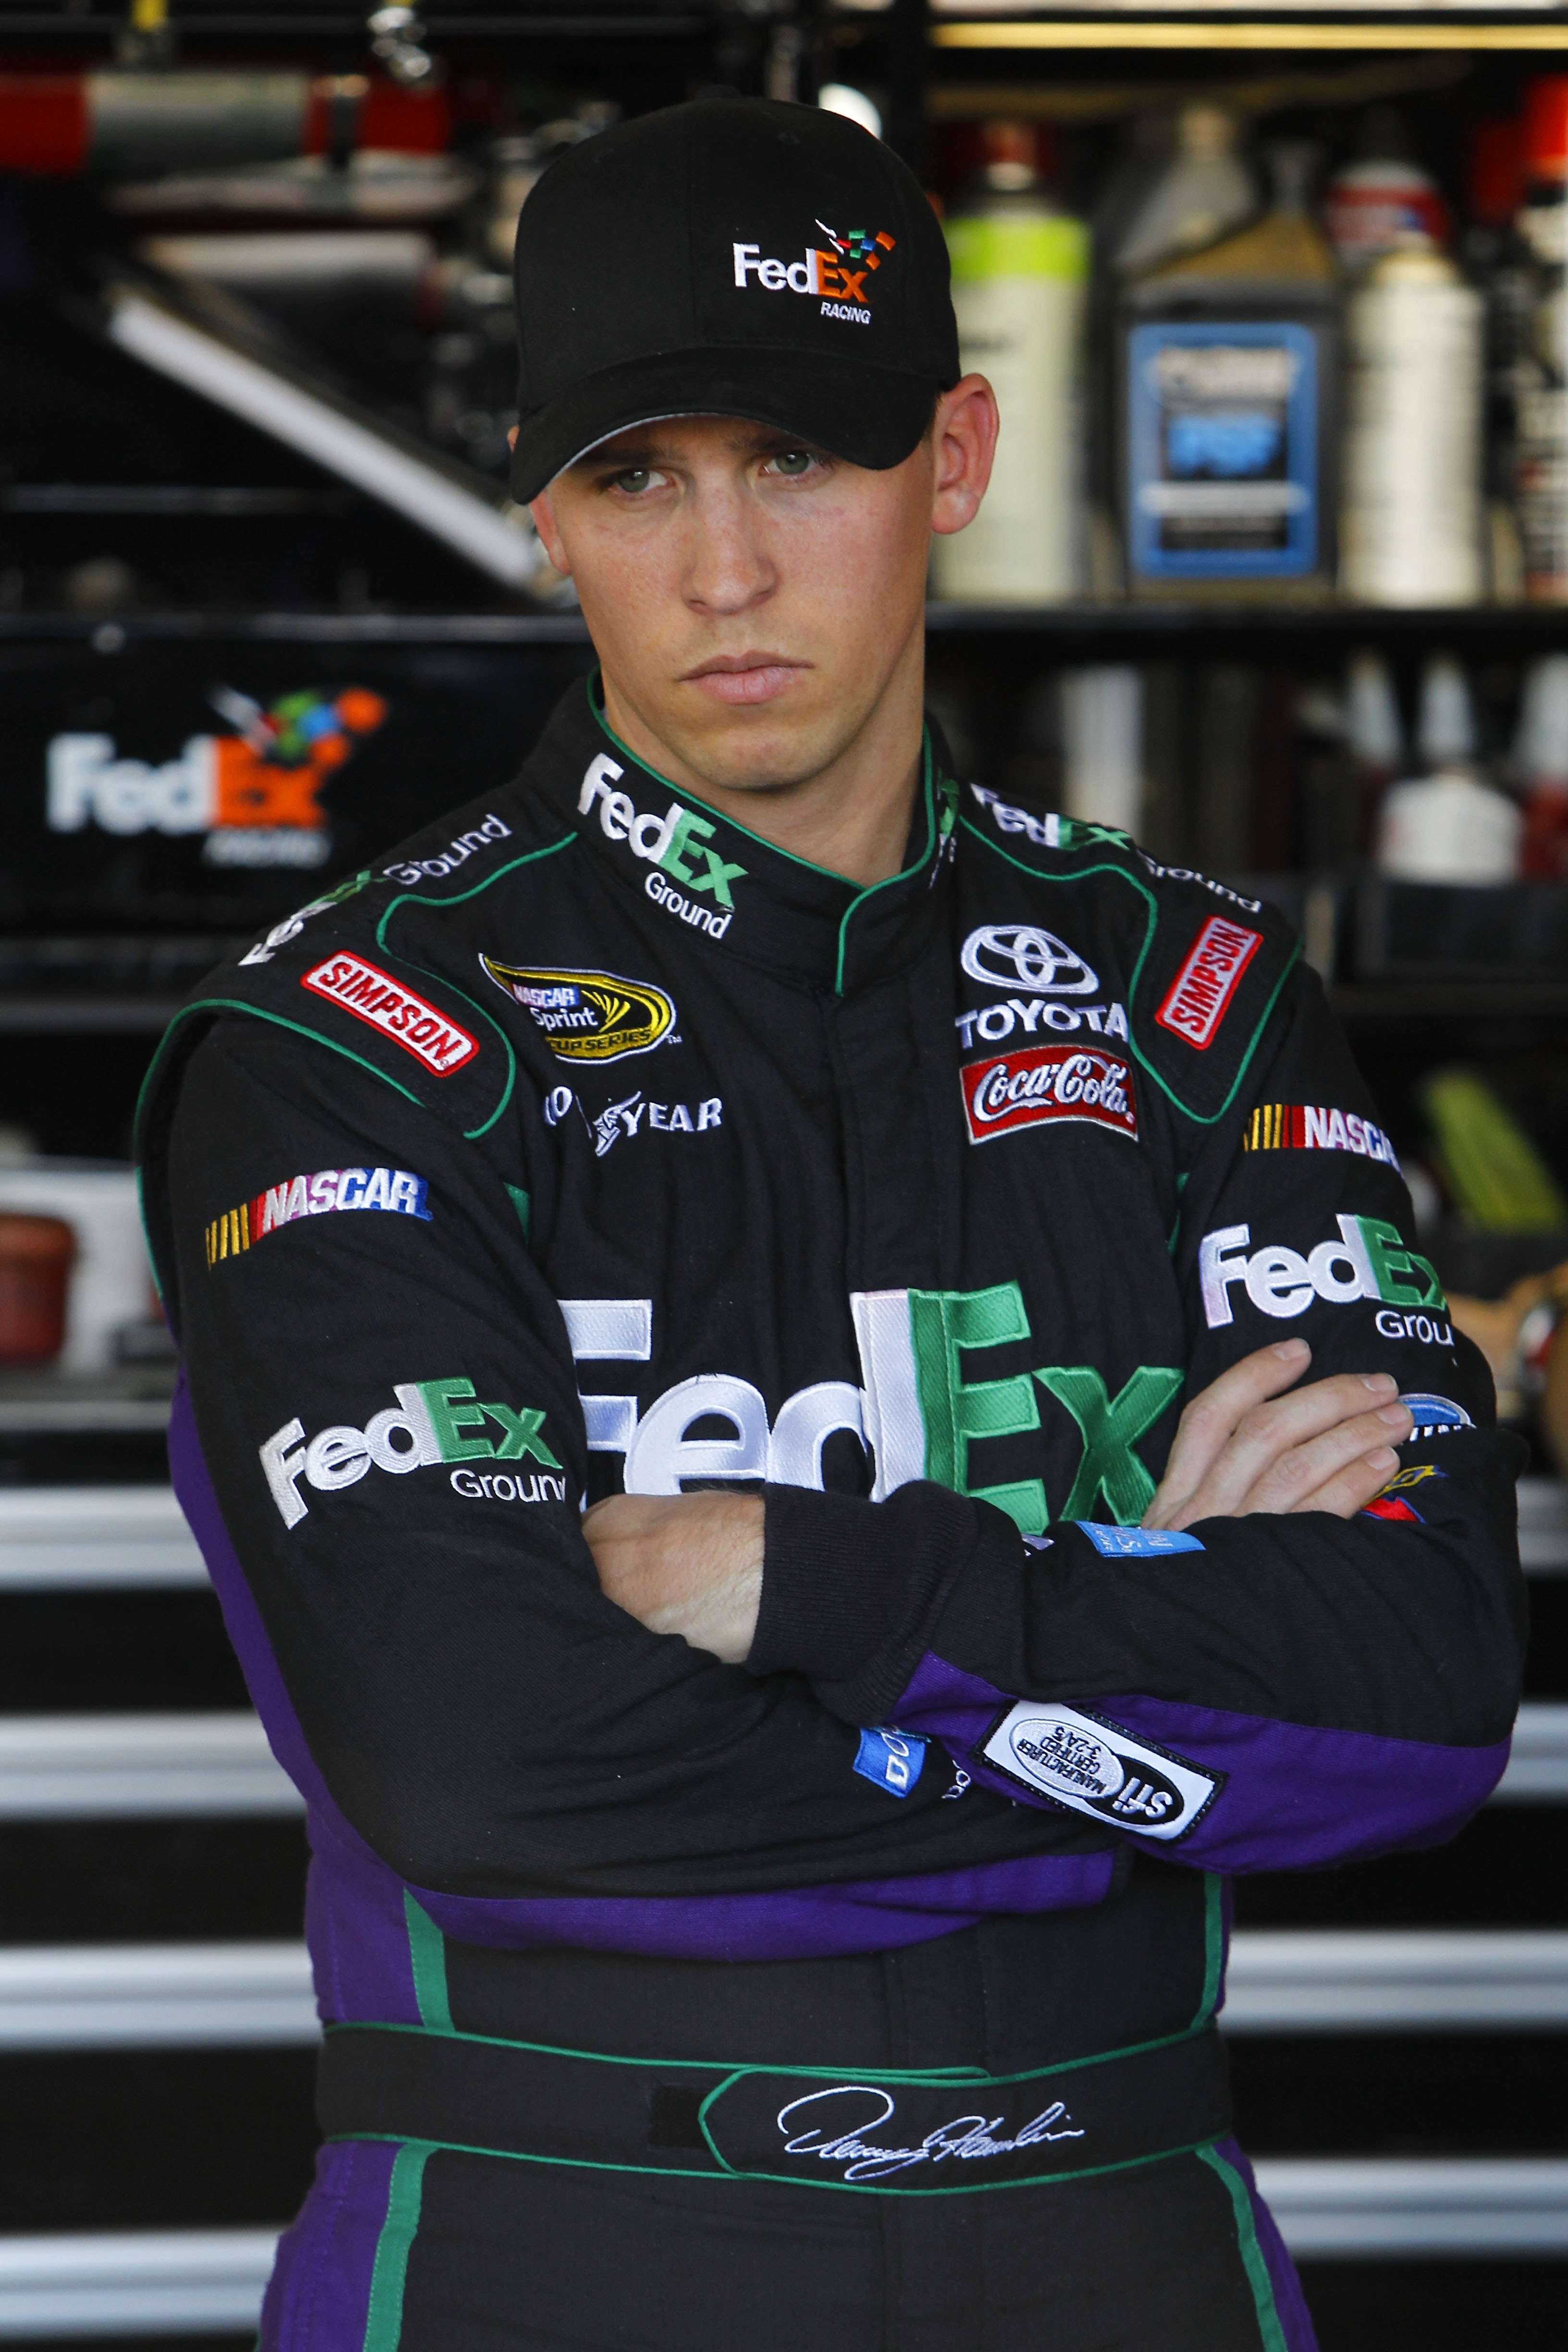 AVONDALE, AZ - NOVEMBER 12:  Denny Hamlin, driver of the #11 FedEx Toyota, stands in the garage during practice for the NASCAR Sprint Cup Series Kobalt Tools 500 at Phoenix International Raceway on November 12, 2010 in Avondale, Arizona.  (Photo by Chris